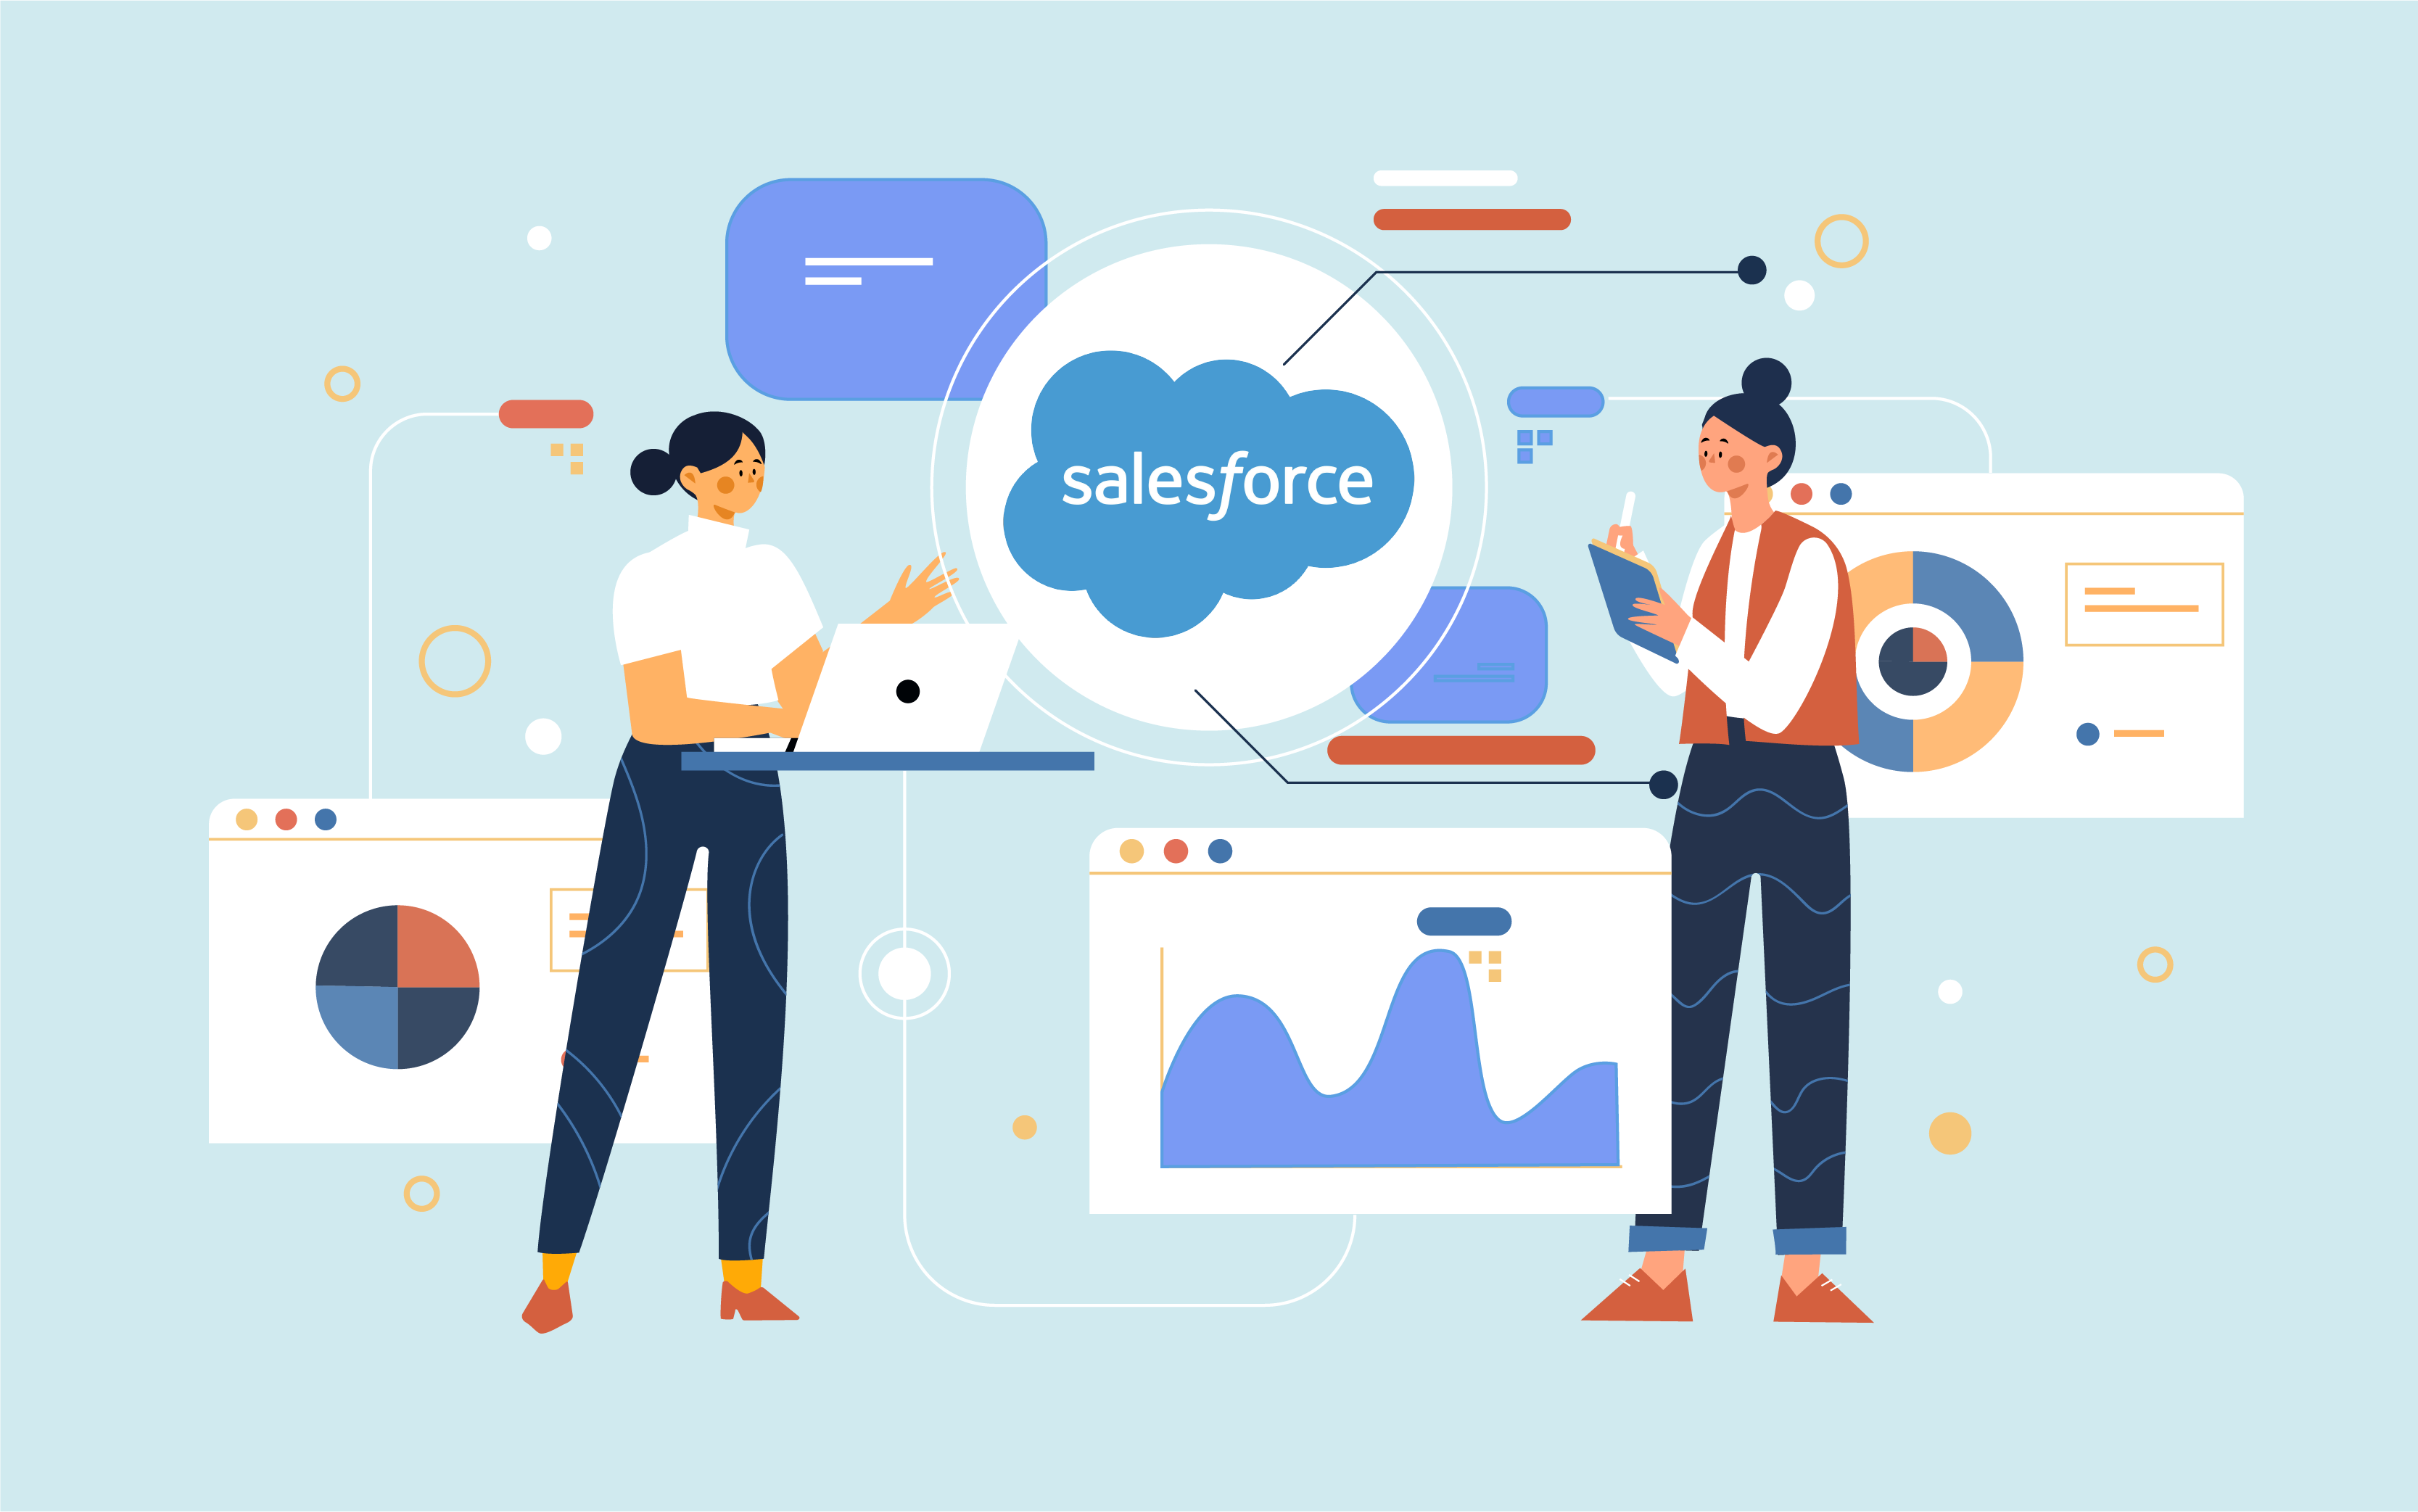 Supercharge Your Business with Optimized Salesforce CRM - Ad Victoriam Salesforce Blog